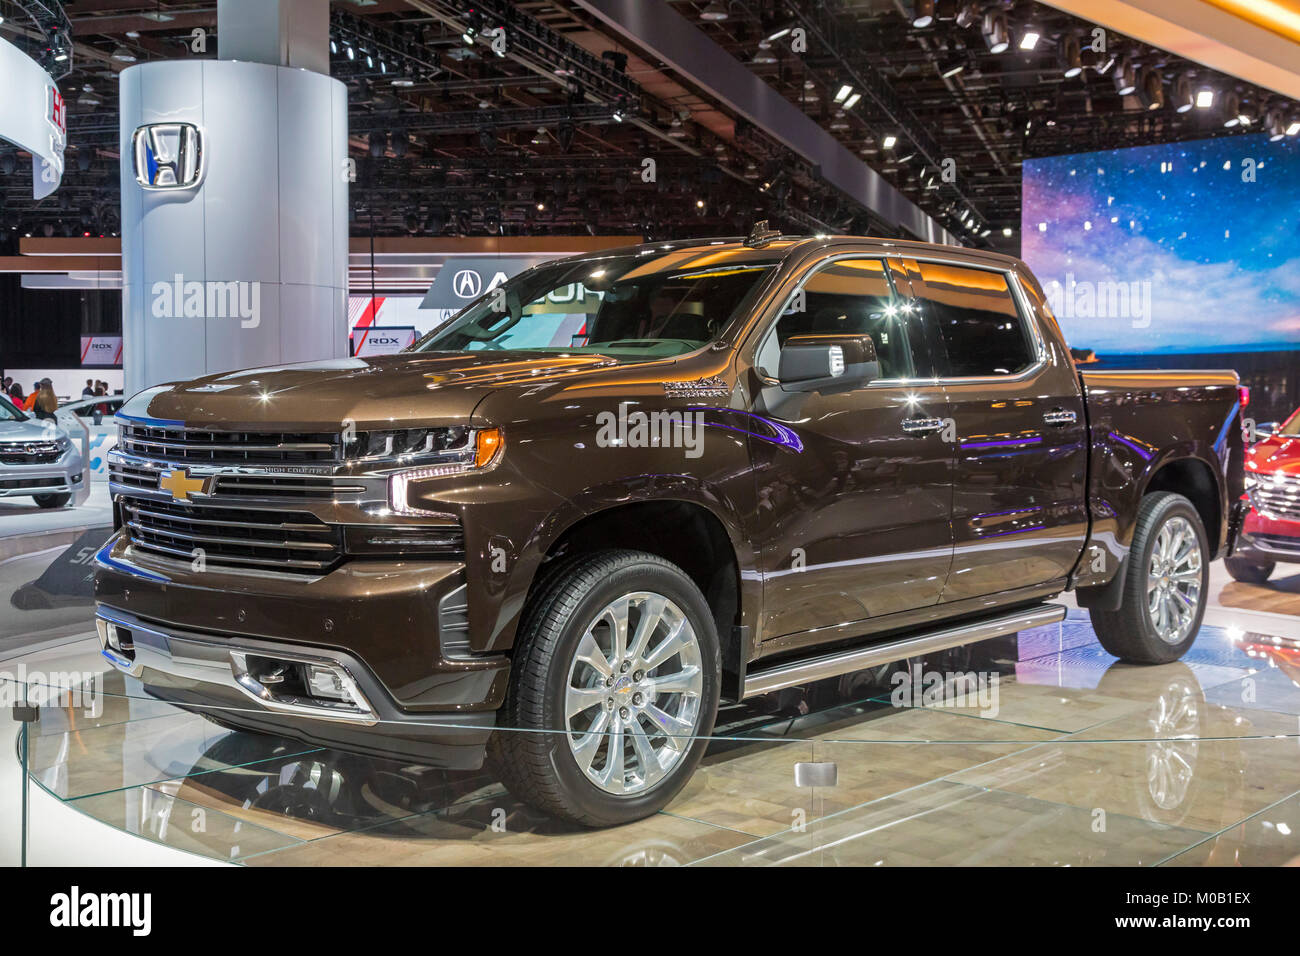 Detroit, Michigan - The 2019 Chevrolet Silverado High Country pickup truck on display at the North American International Auto Show. Stock Photo